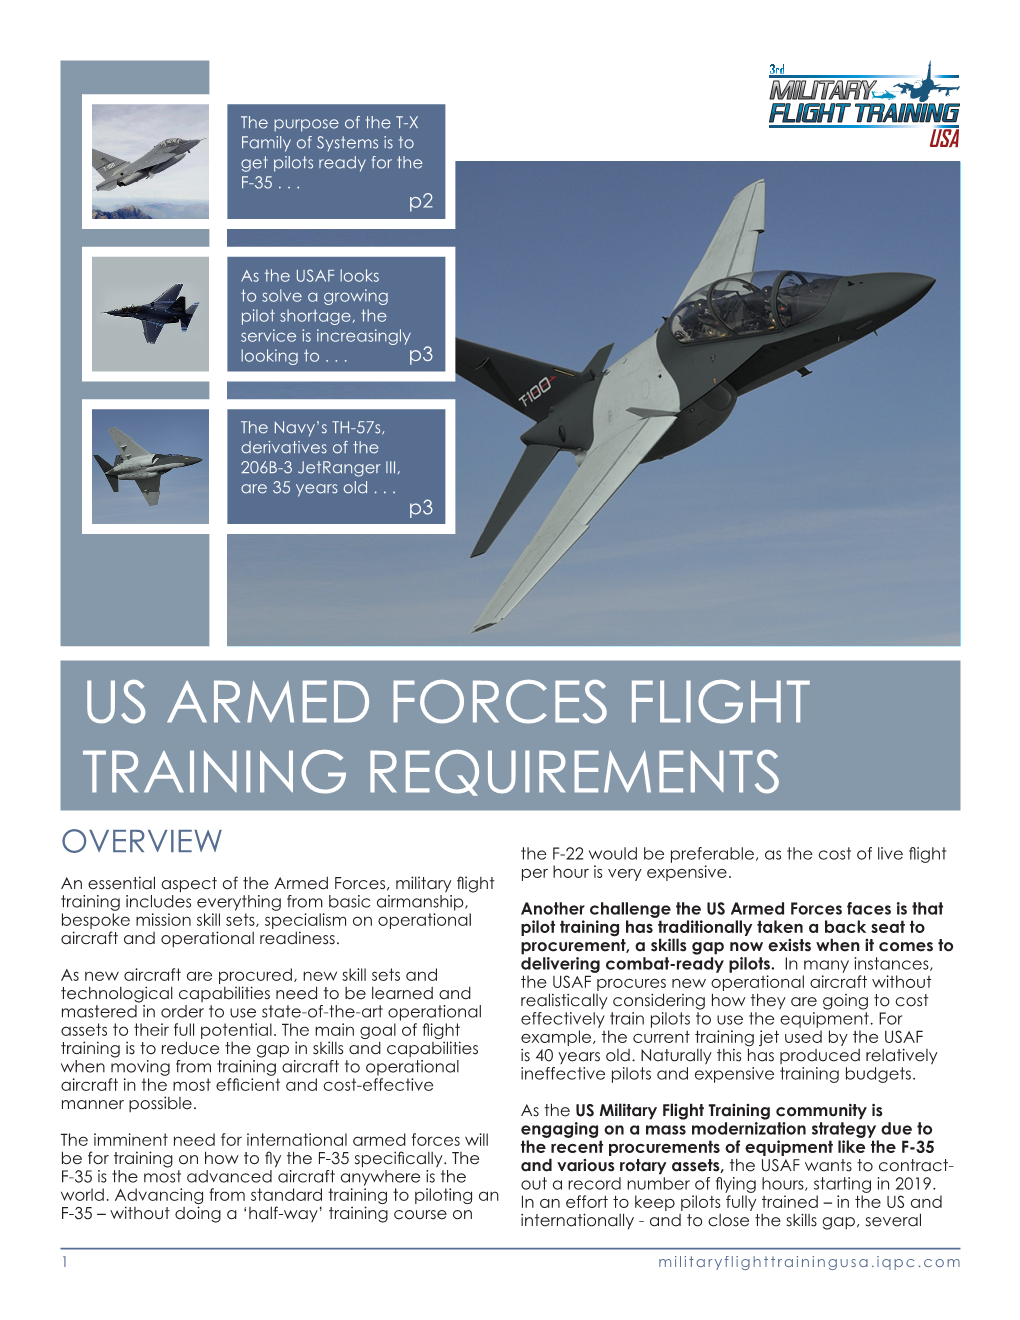 Us Armed Forces Flight Training Requirements